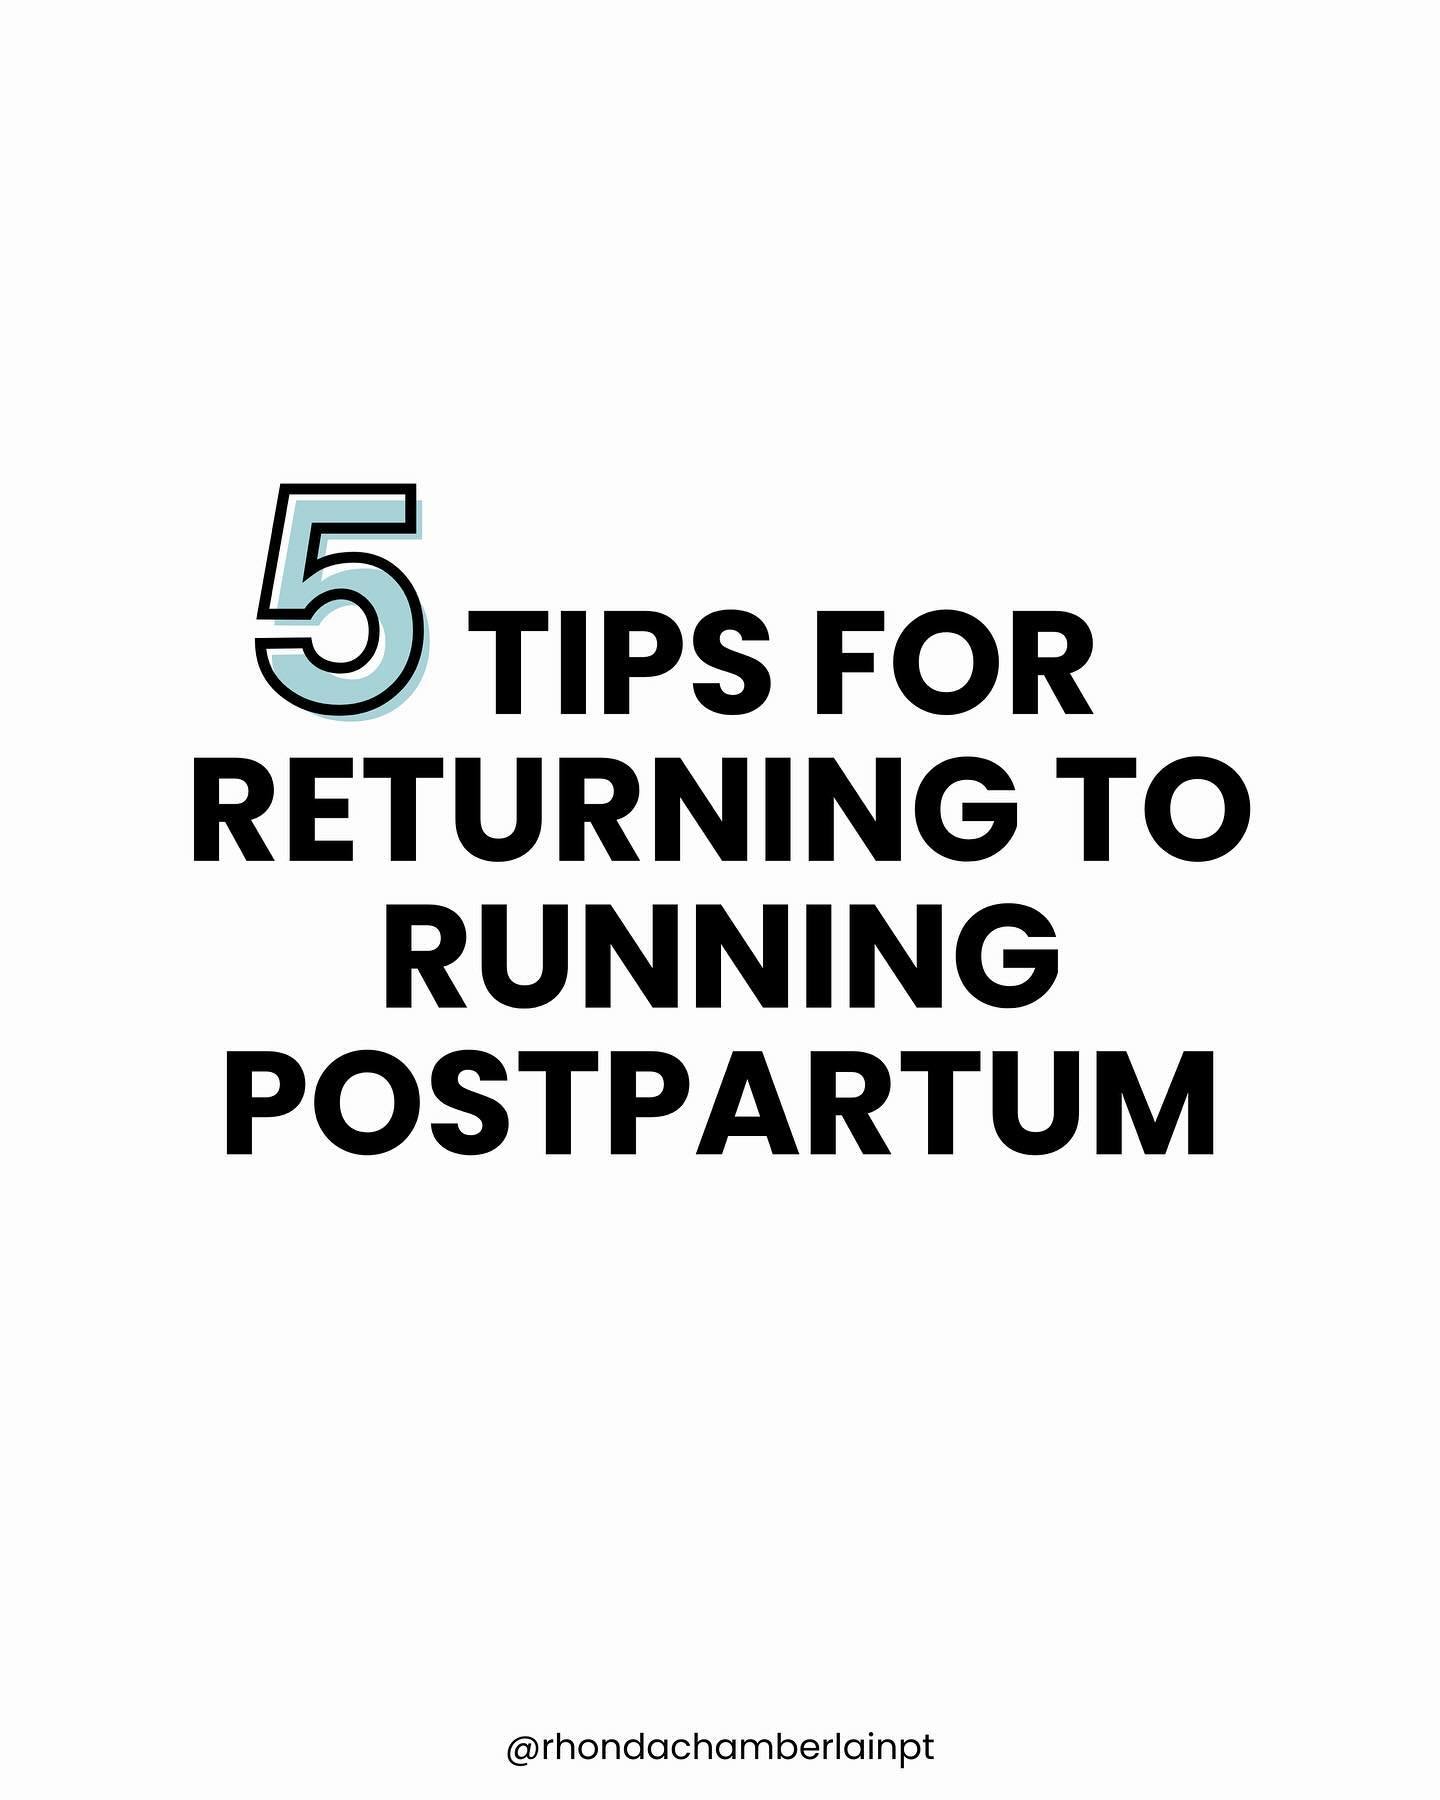 Now that nicer weather is here, some of ya&rsquo;ll might be considering adding running to your fitness goals. (Not me, but some of you 🤣).

If you&rsquo;re just getting back into running postpartum (or post time away from it), here are some helpful